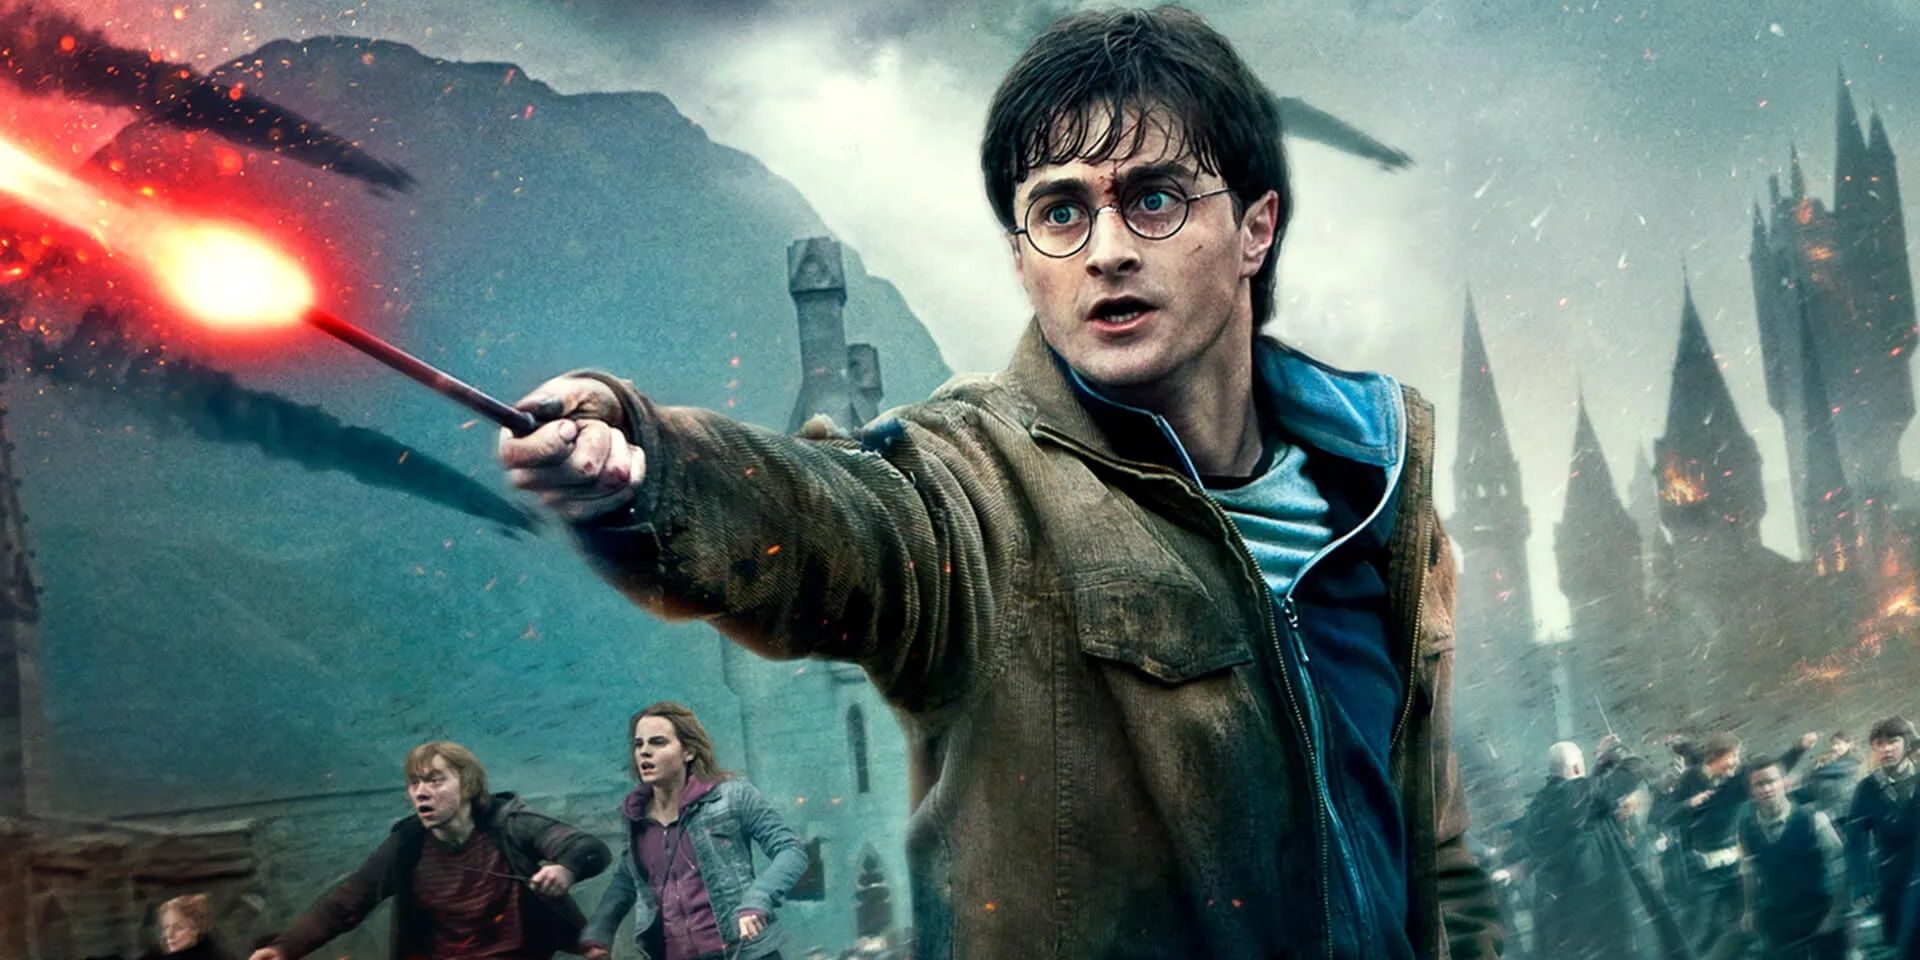 Daniel Radcliffe as Harry Potter on the Deathly Hallows poster